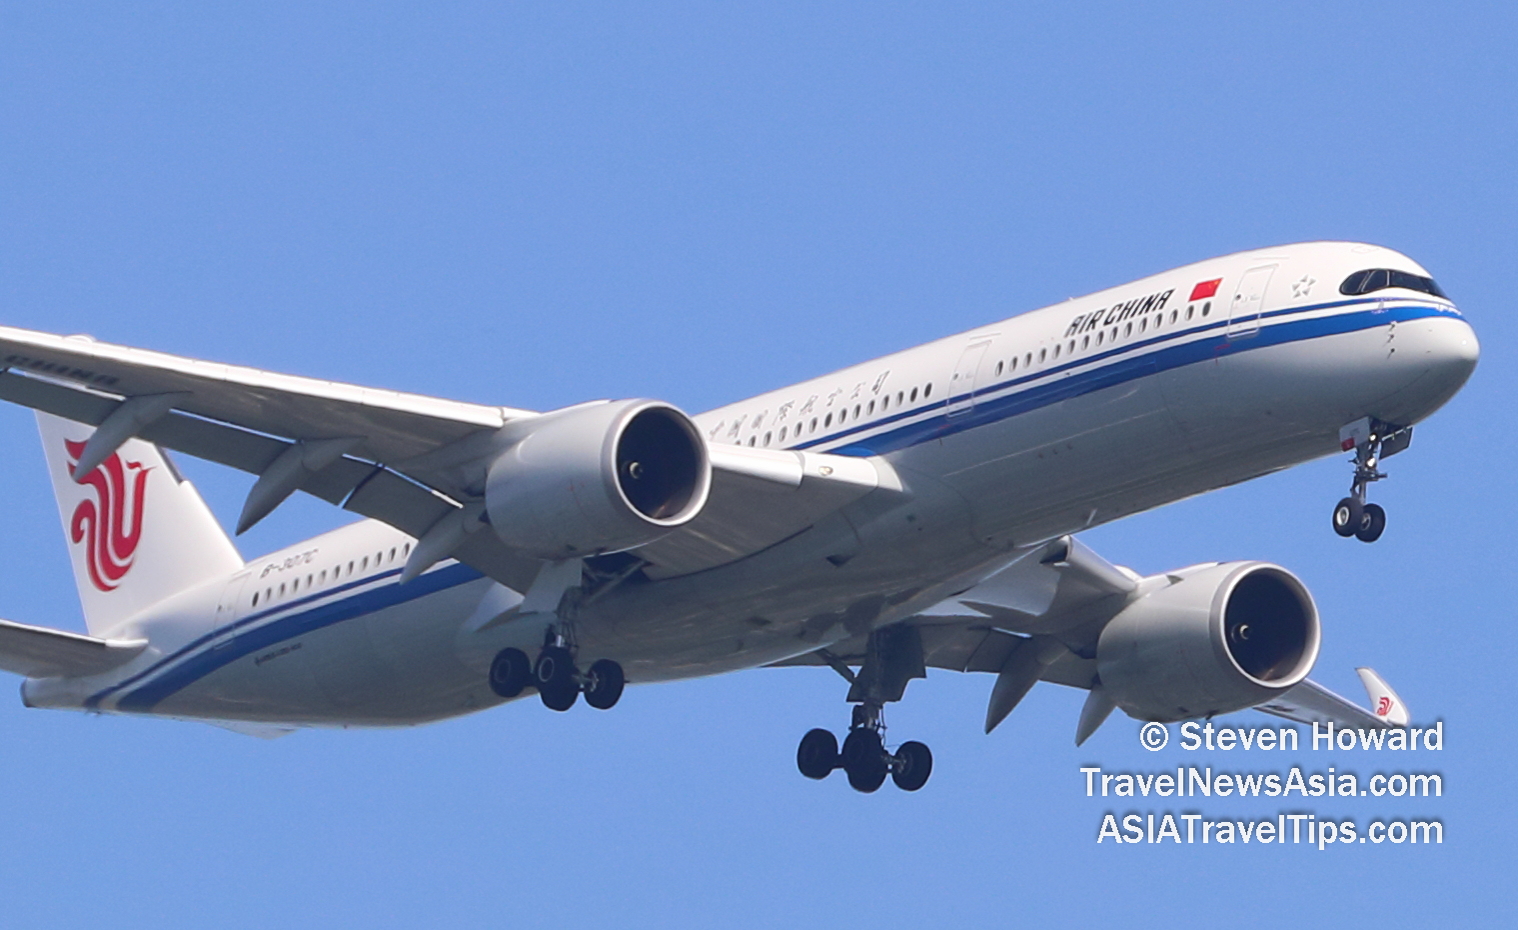 Air China A350-900 reg: B-307C. Picture by Steven Howard of TravelNewsAsia.com Click to enlarge.